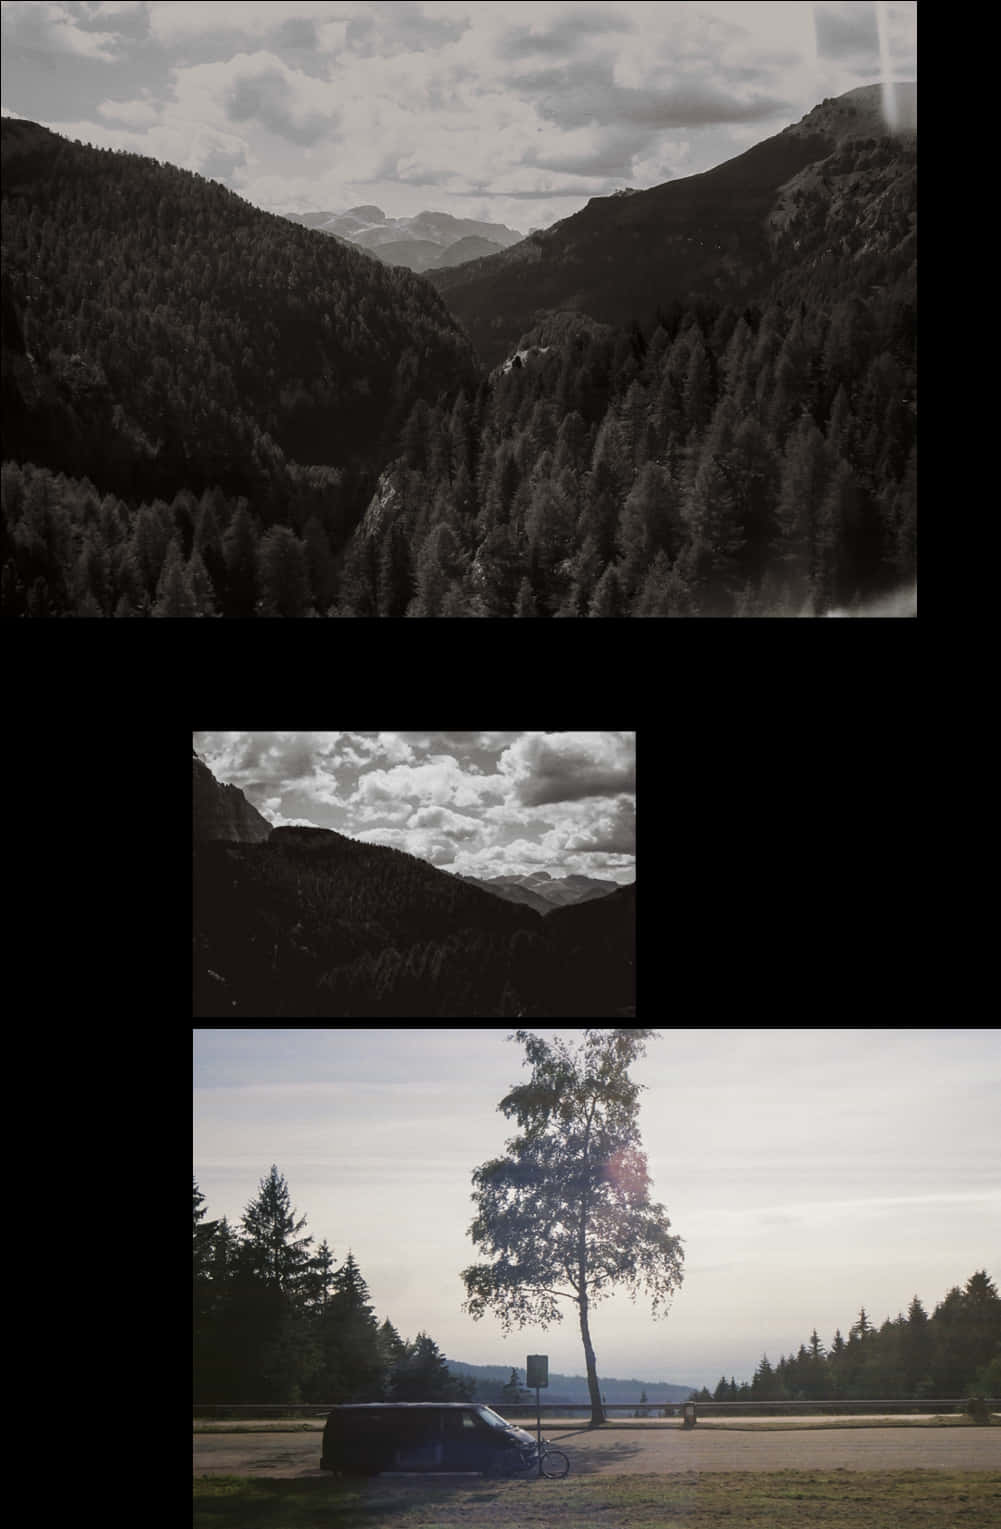 A Collage Of Different Views Of A Mountain Range